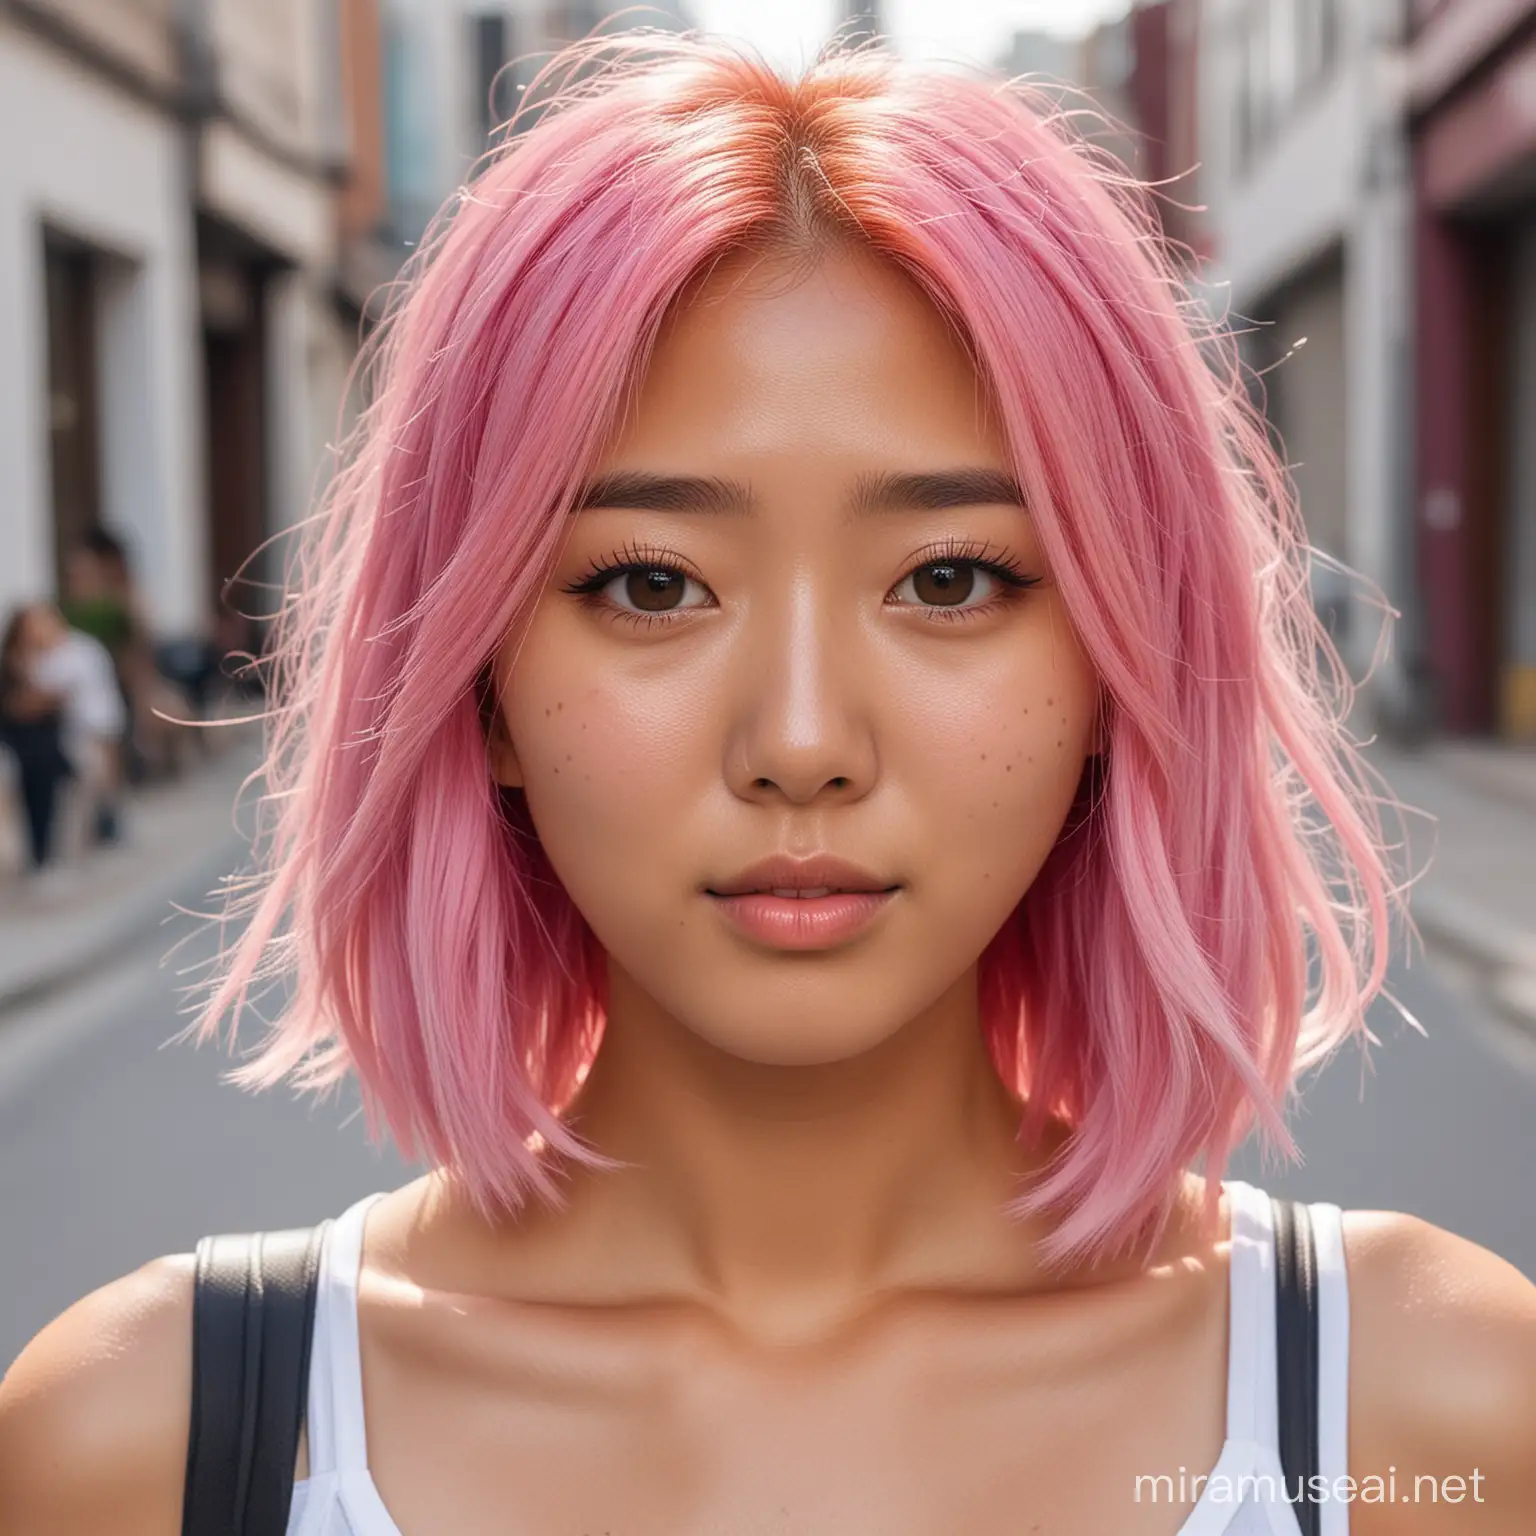 a tanned, cute-faced Korean woman with pink hair, in her 20s, on the street

